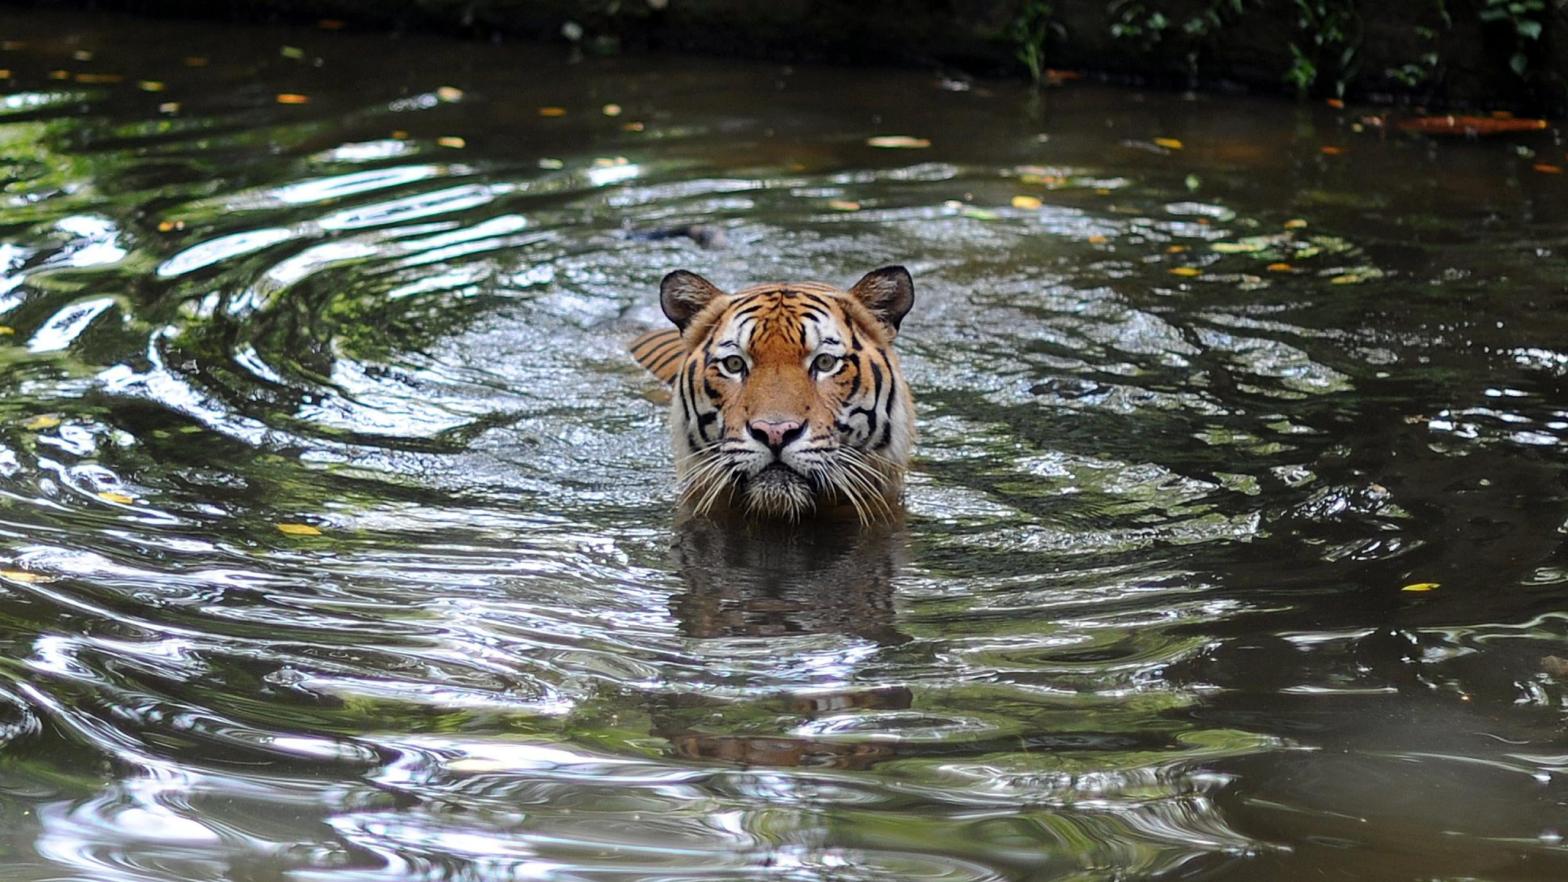 This image shows a Malayan Tiger at the National Zoo in Kuala Lumpur on May 23, 2010.  (Image: Saeed Khan, Getty Images)